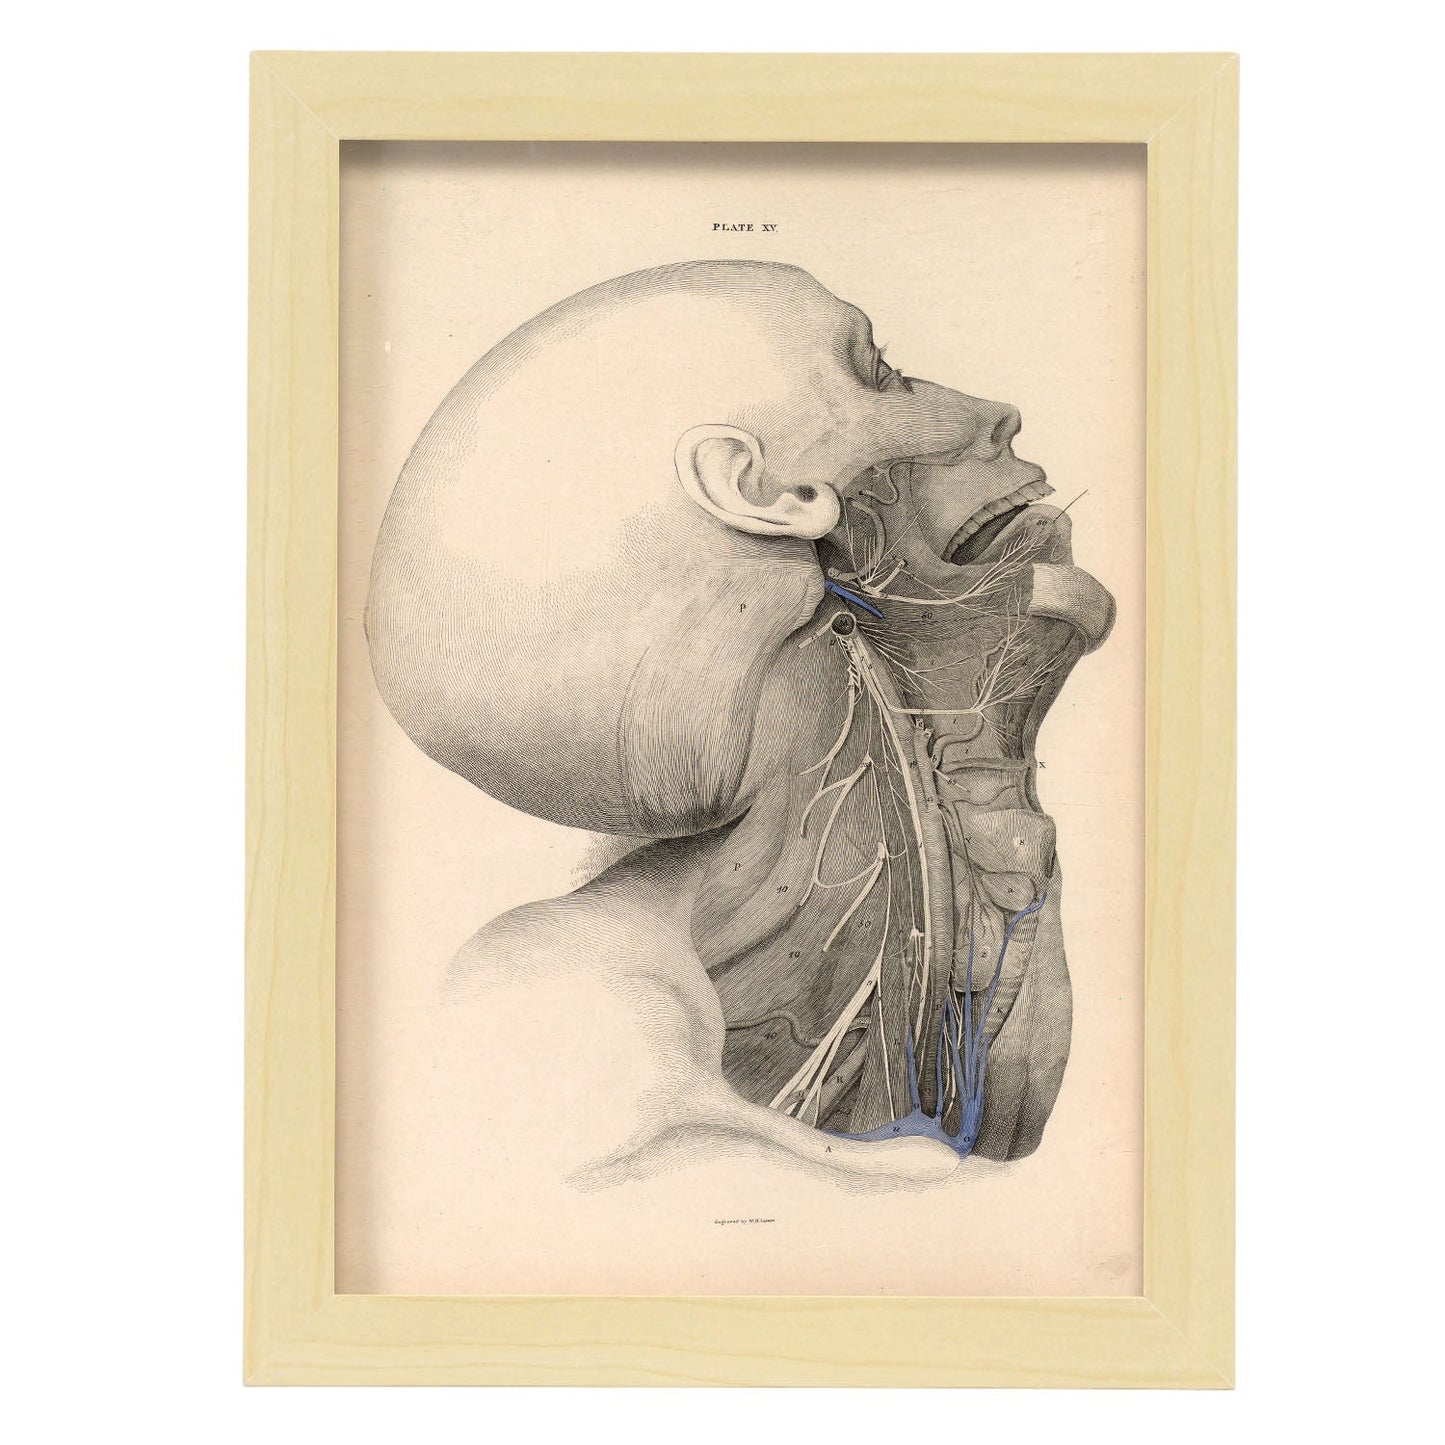 Dissection of the face and neck-Artwork-Nacnic-A4-Marco Madera clara-Nacnic Estudio SL